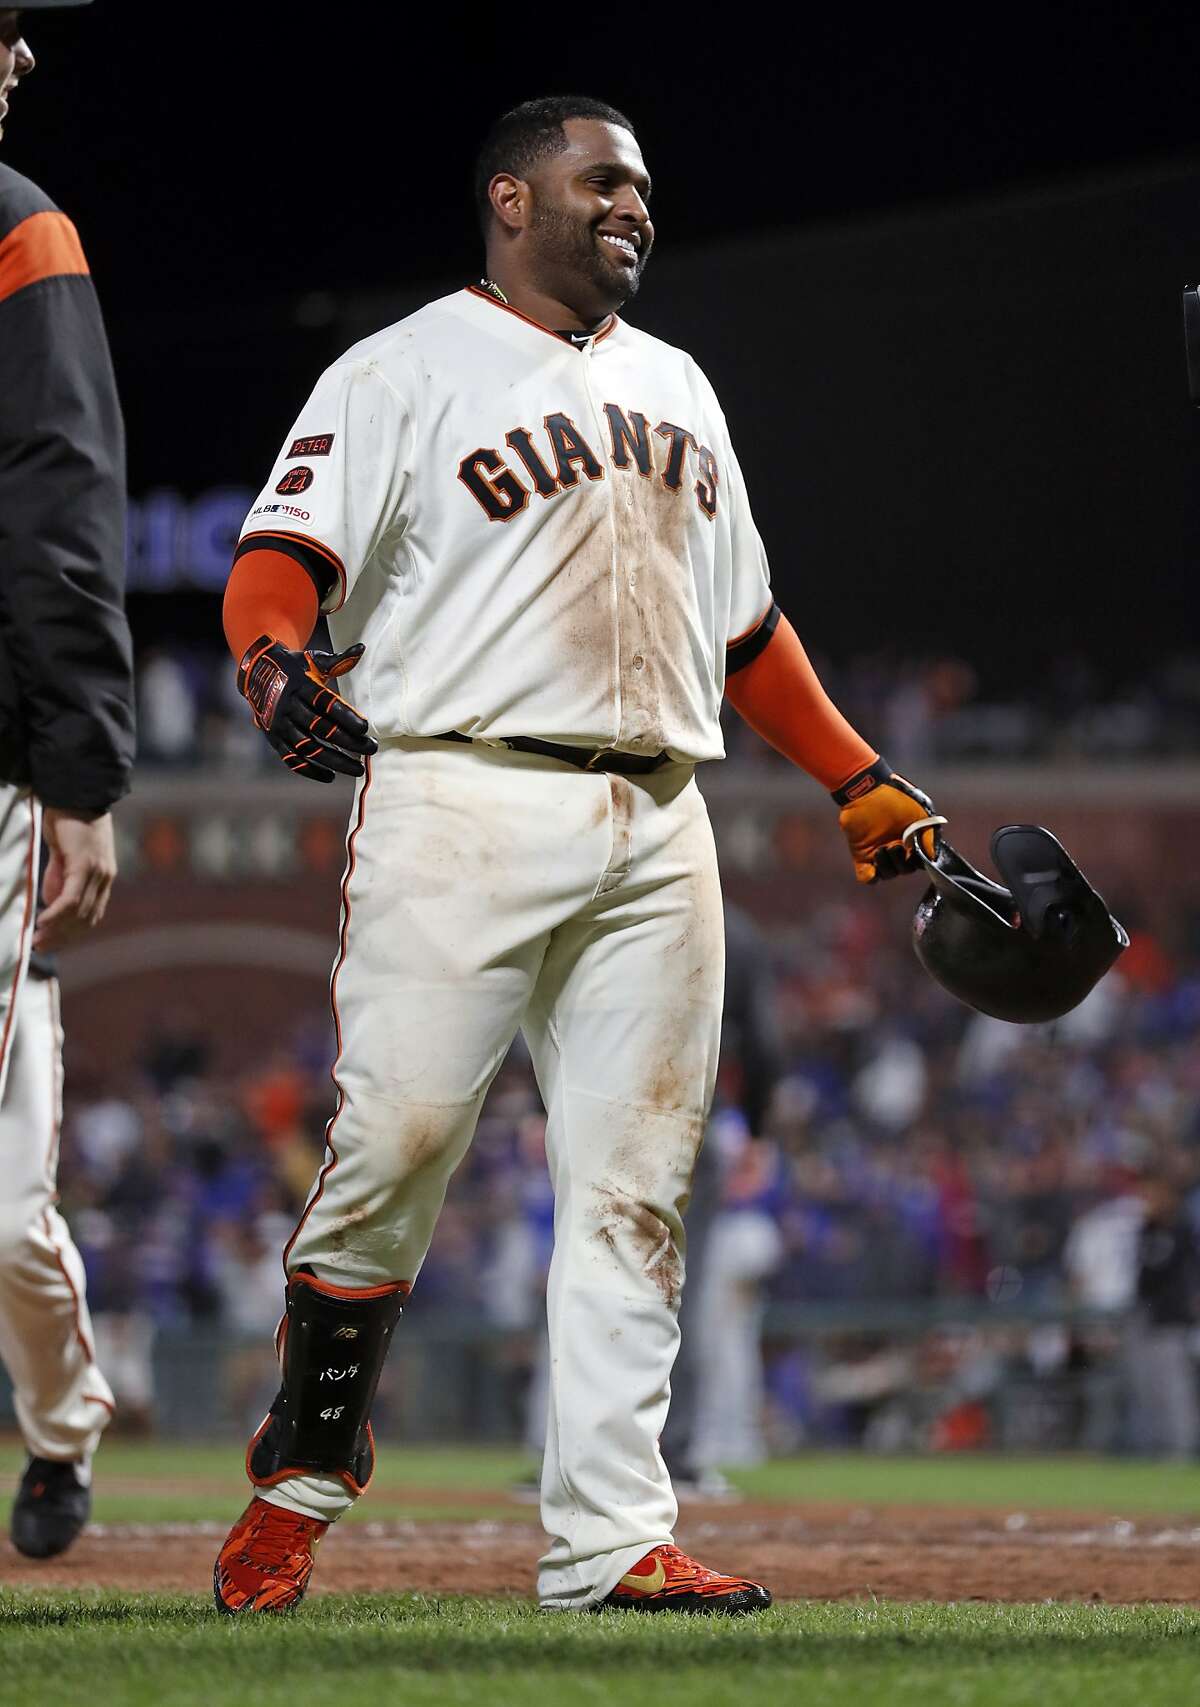 San Francisco Giants' Pablo Sandoval celebrates his walk off home run in 13th inning of 5-4 win over Chicago Cubs during MLB game at Oracle Park in San Francisco, Calif., on Tuesday, July 23, 2019.